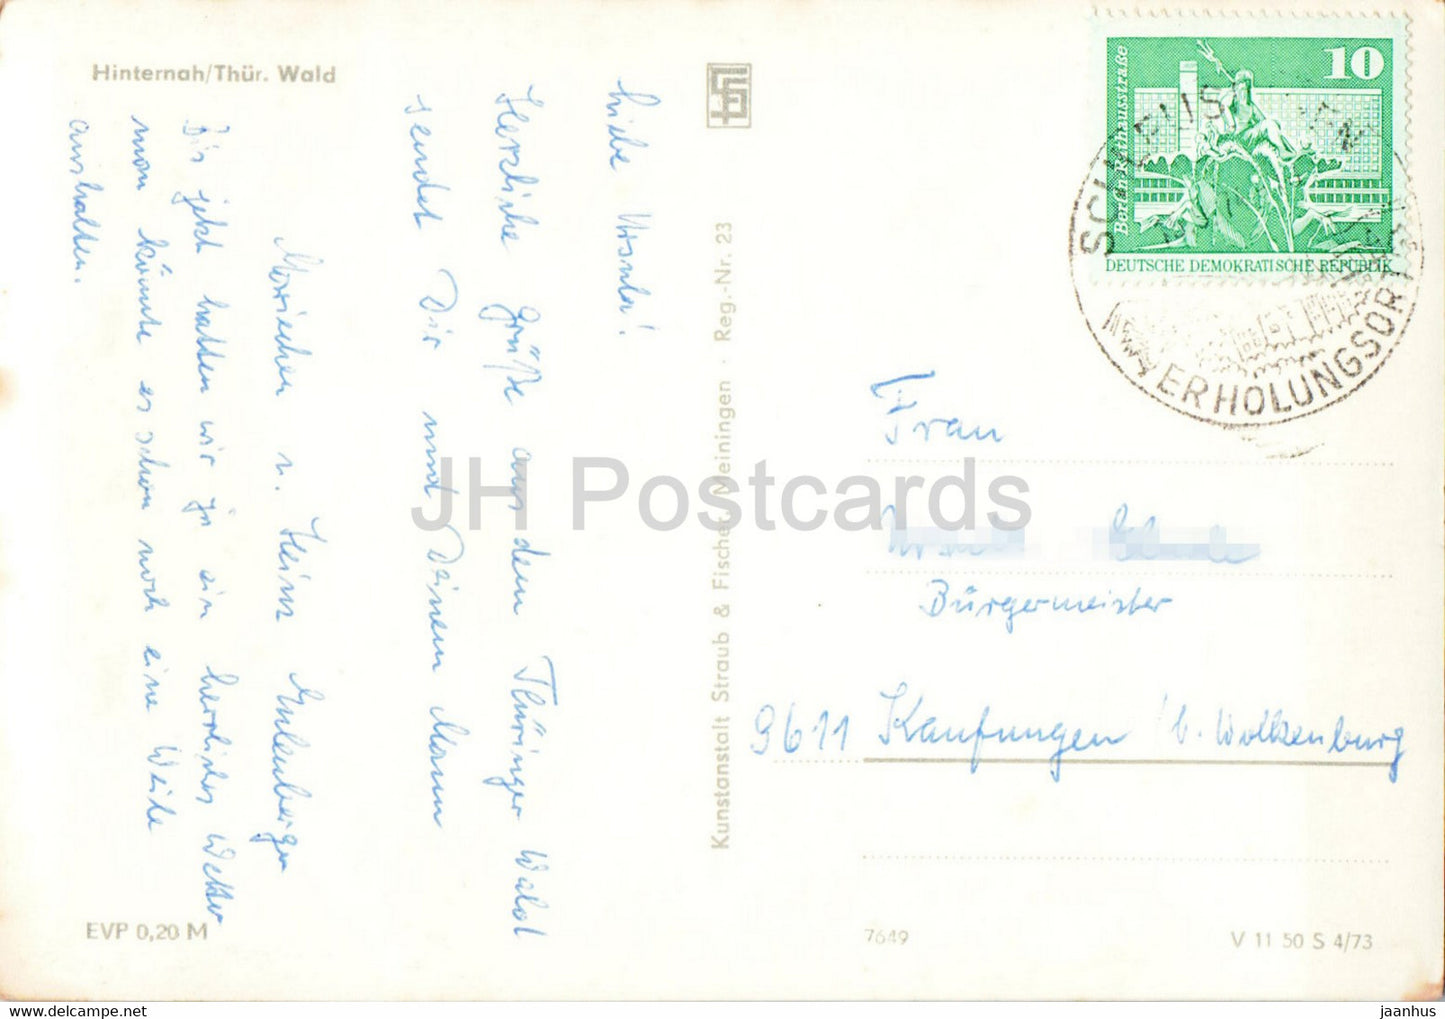 Hinternah - Thur Wald - 1 - old postcard - Germany DDR - used